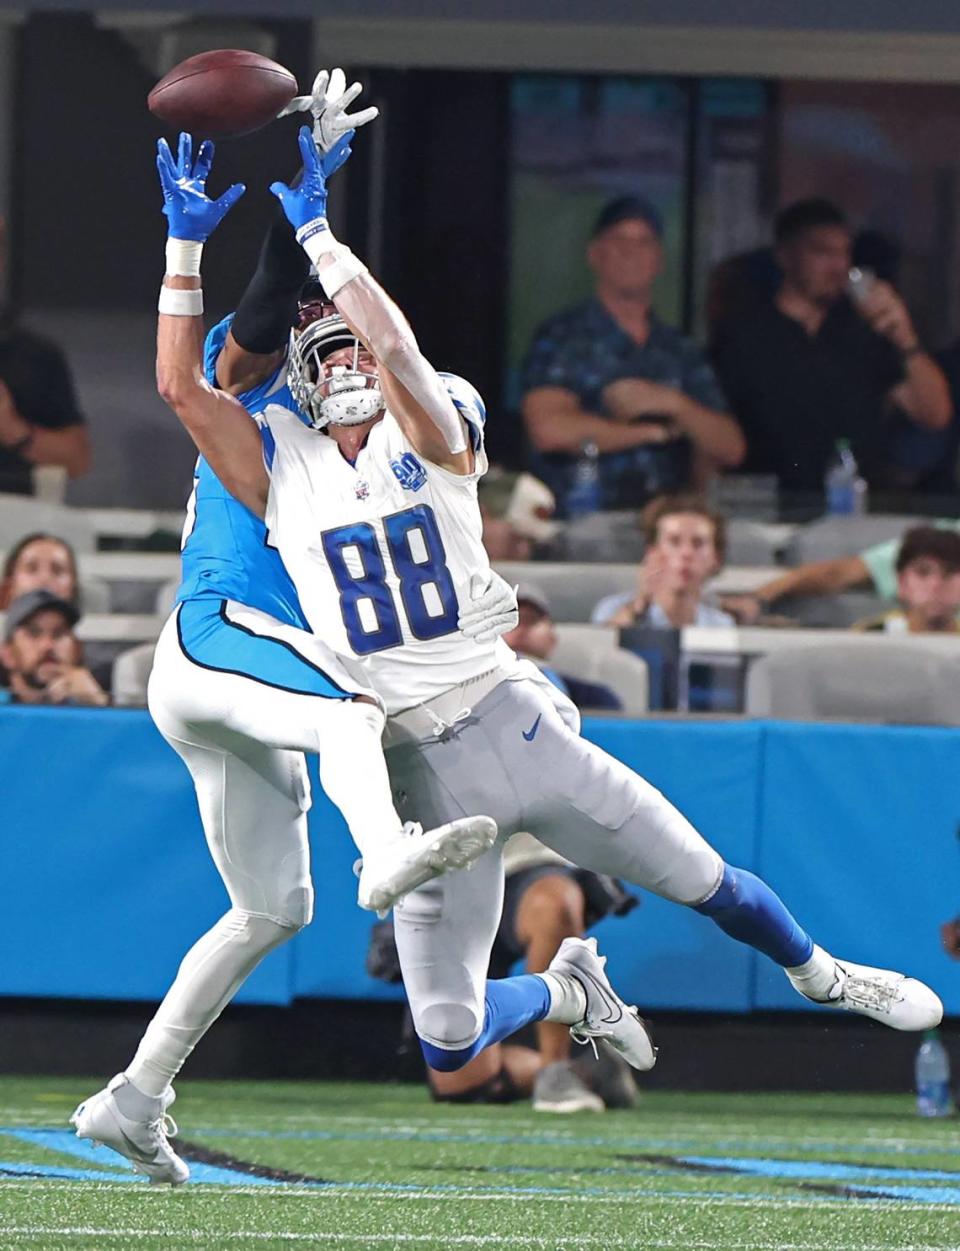 Carolina Panthers cornerback CJ Henderson, left, breaks up a pass meant for Detroit Lions wide receiver Chase Cota, right, during second quarter action on Friday, August 25, 2023 at Bank of America Stadium in Charlotte, NC. Pass interference was called on Henderson on the play.